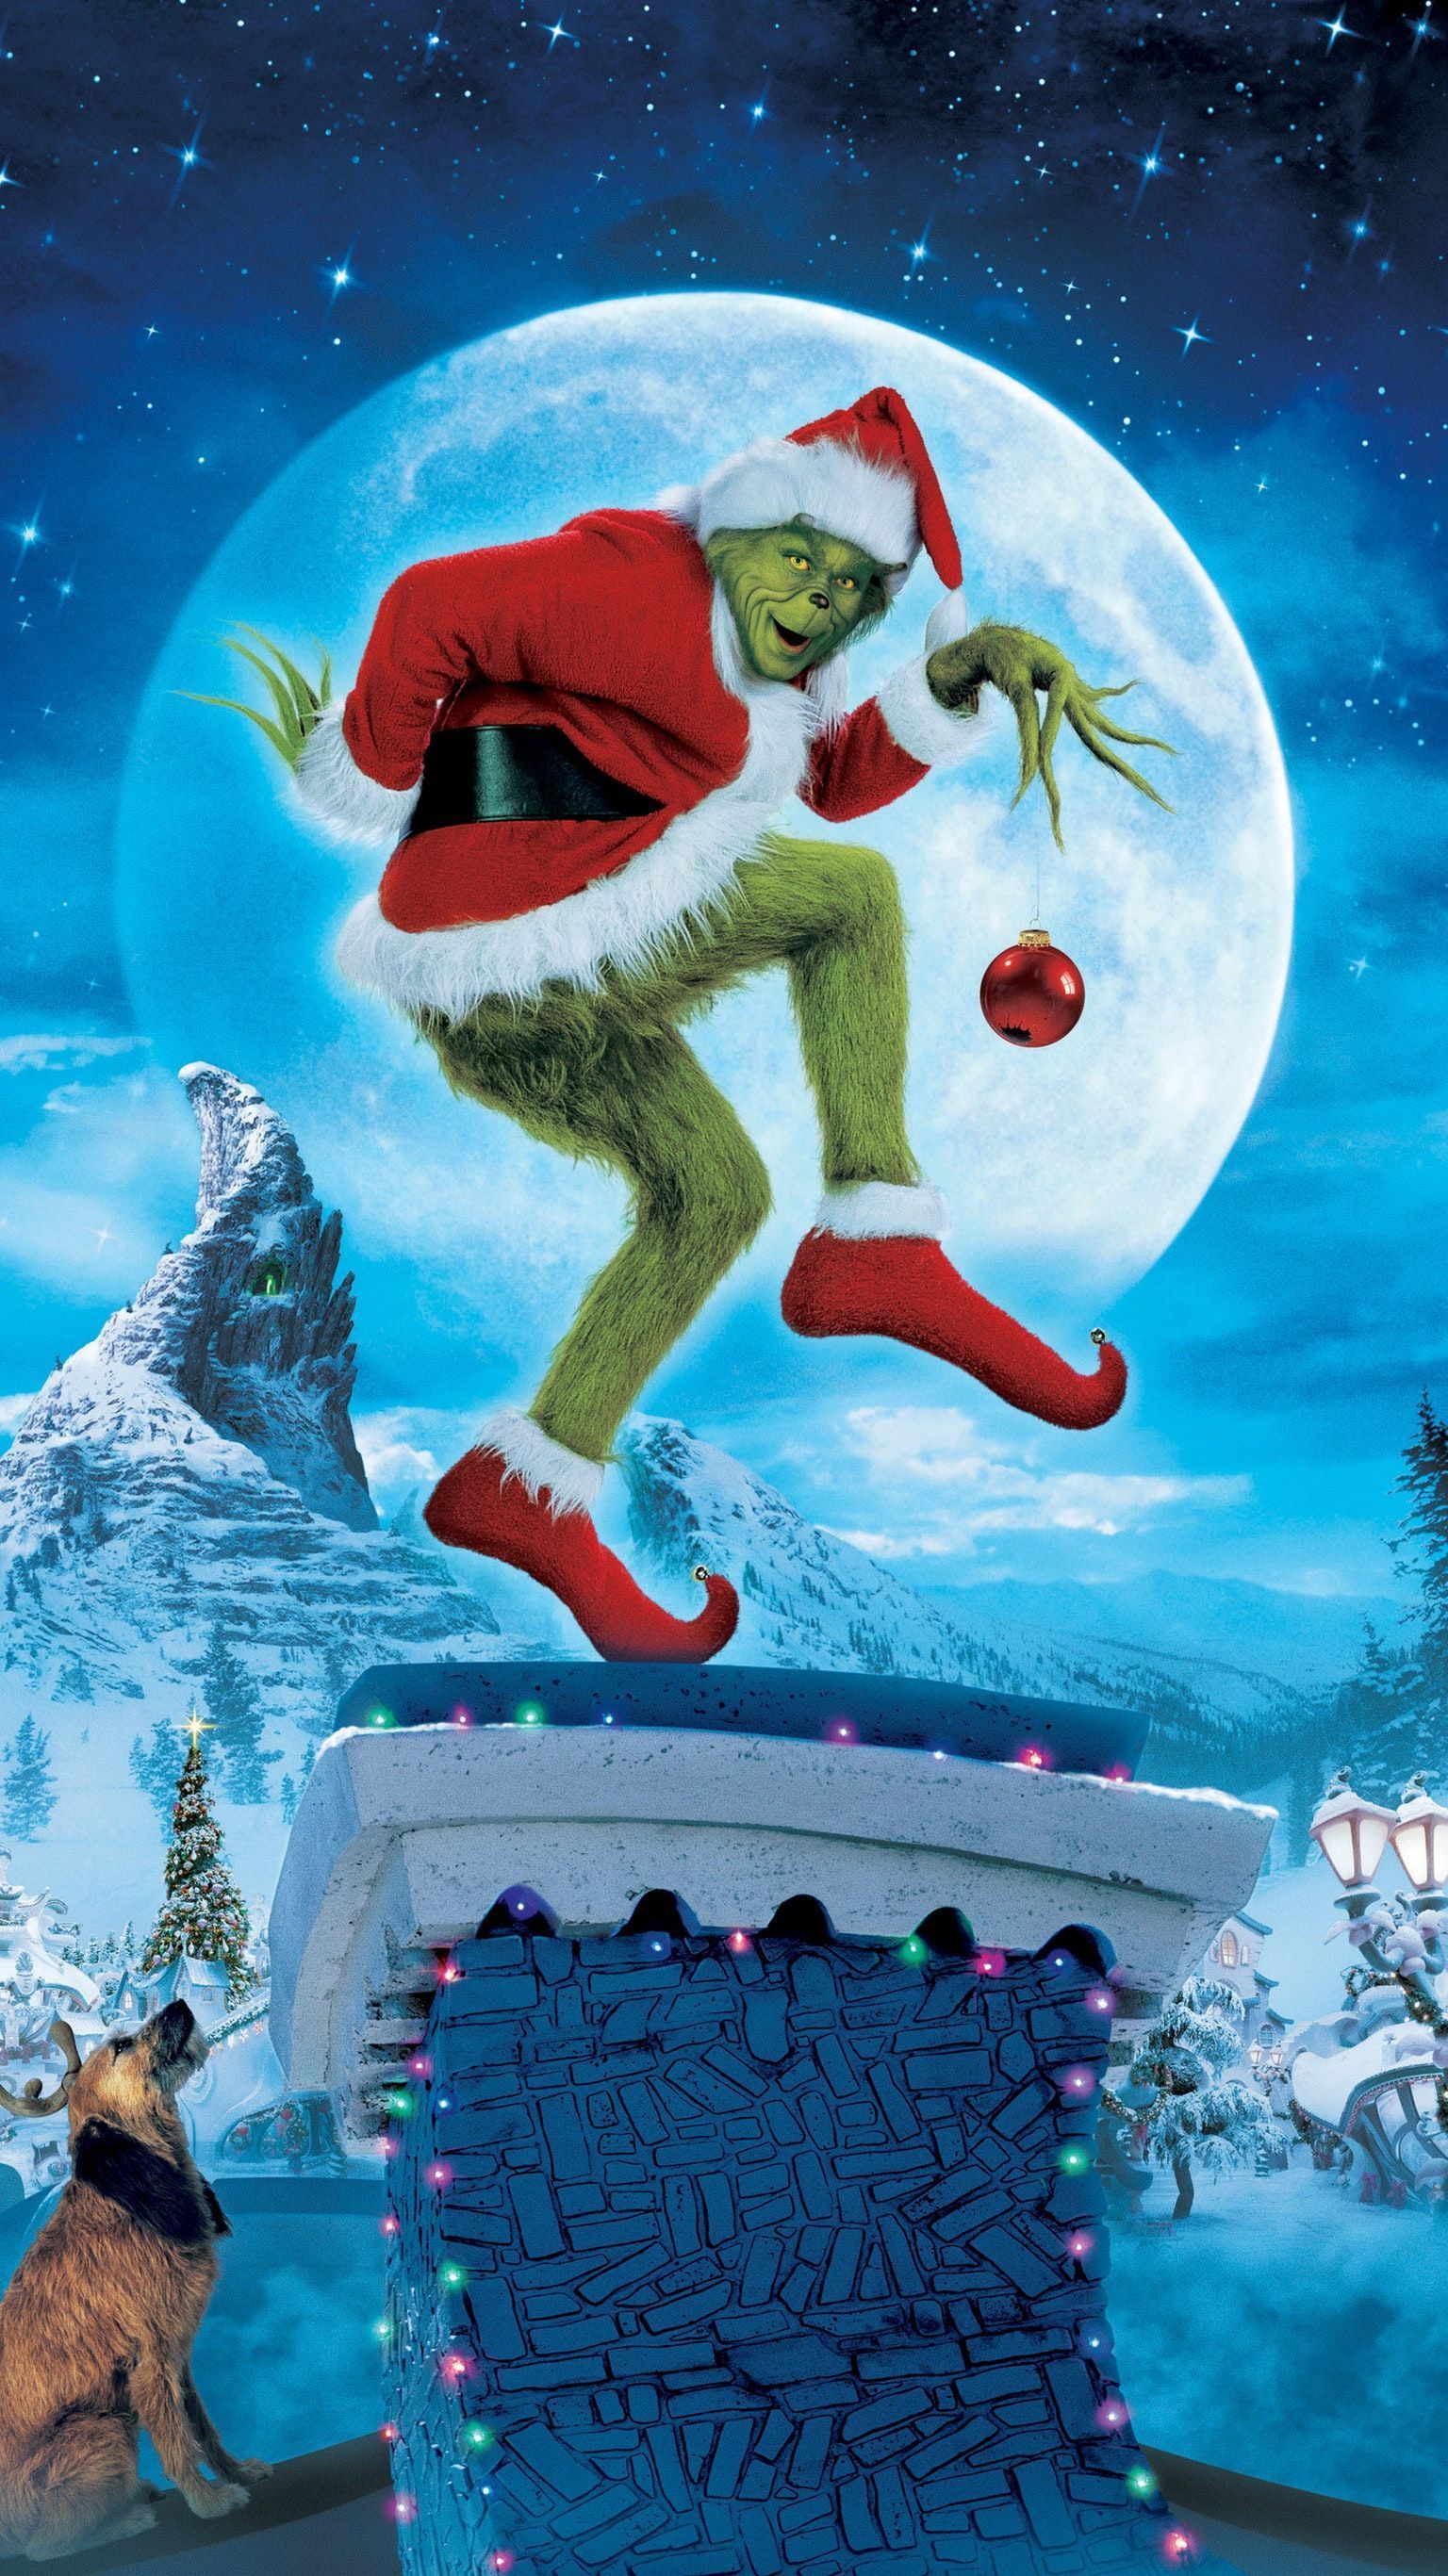 How the Grinch Stole Christmas (2000) Phone Wallpaper. Moviemania #christmaswall. Christmas phone wallpaper, Cute christmas wallpaper, Wallpaper iphone christmas